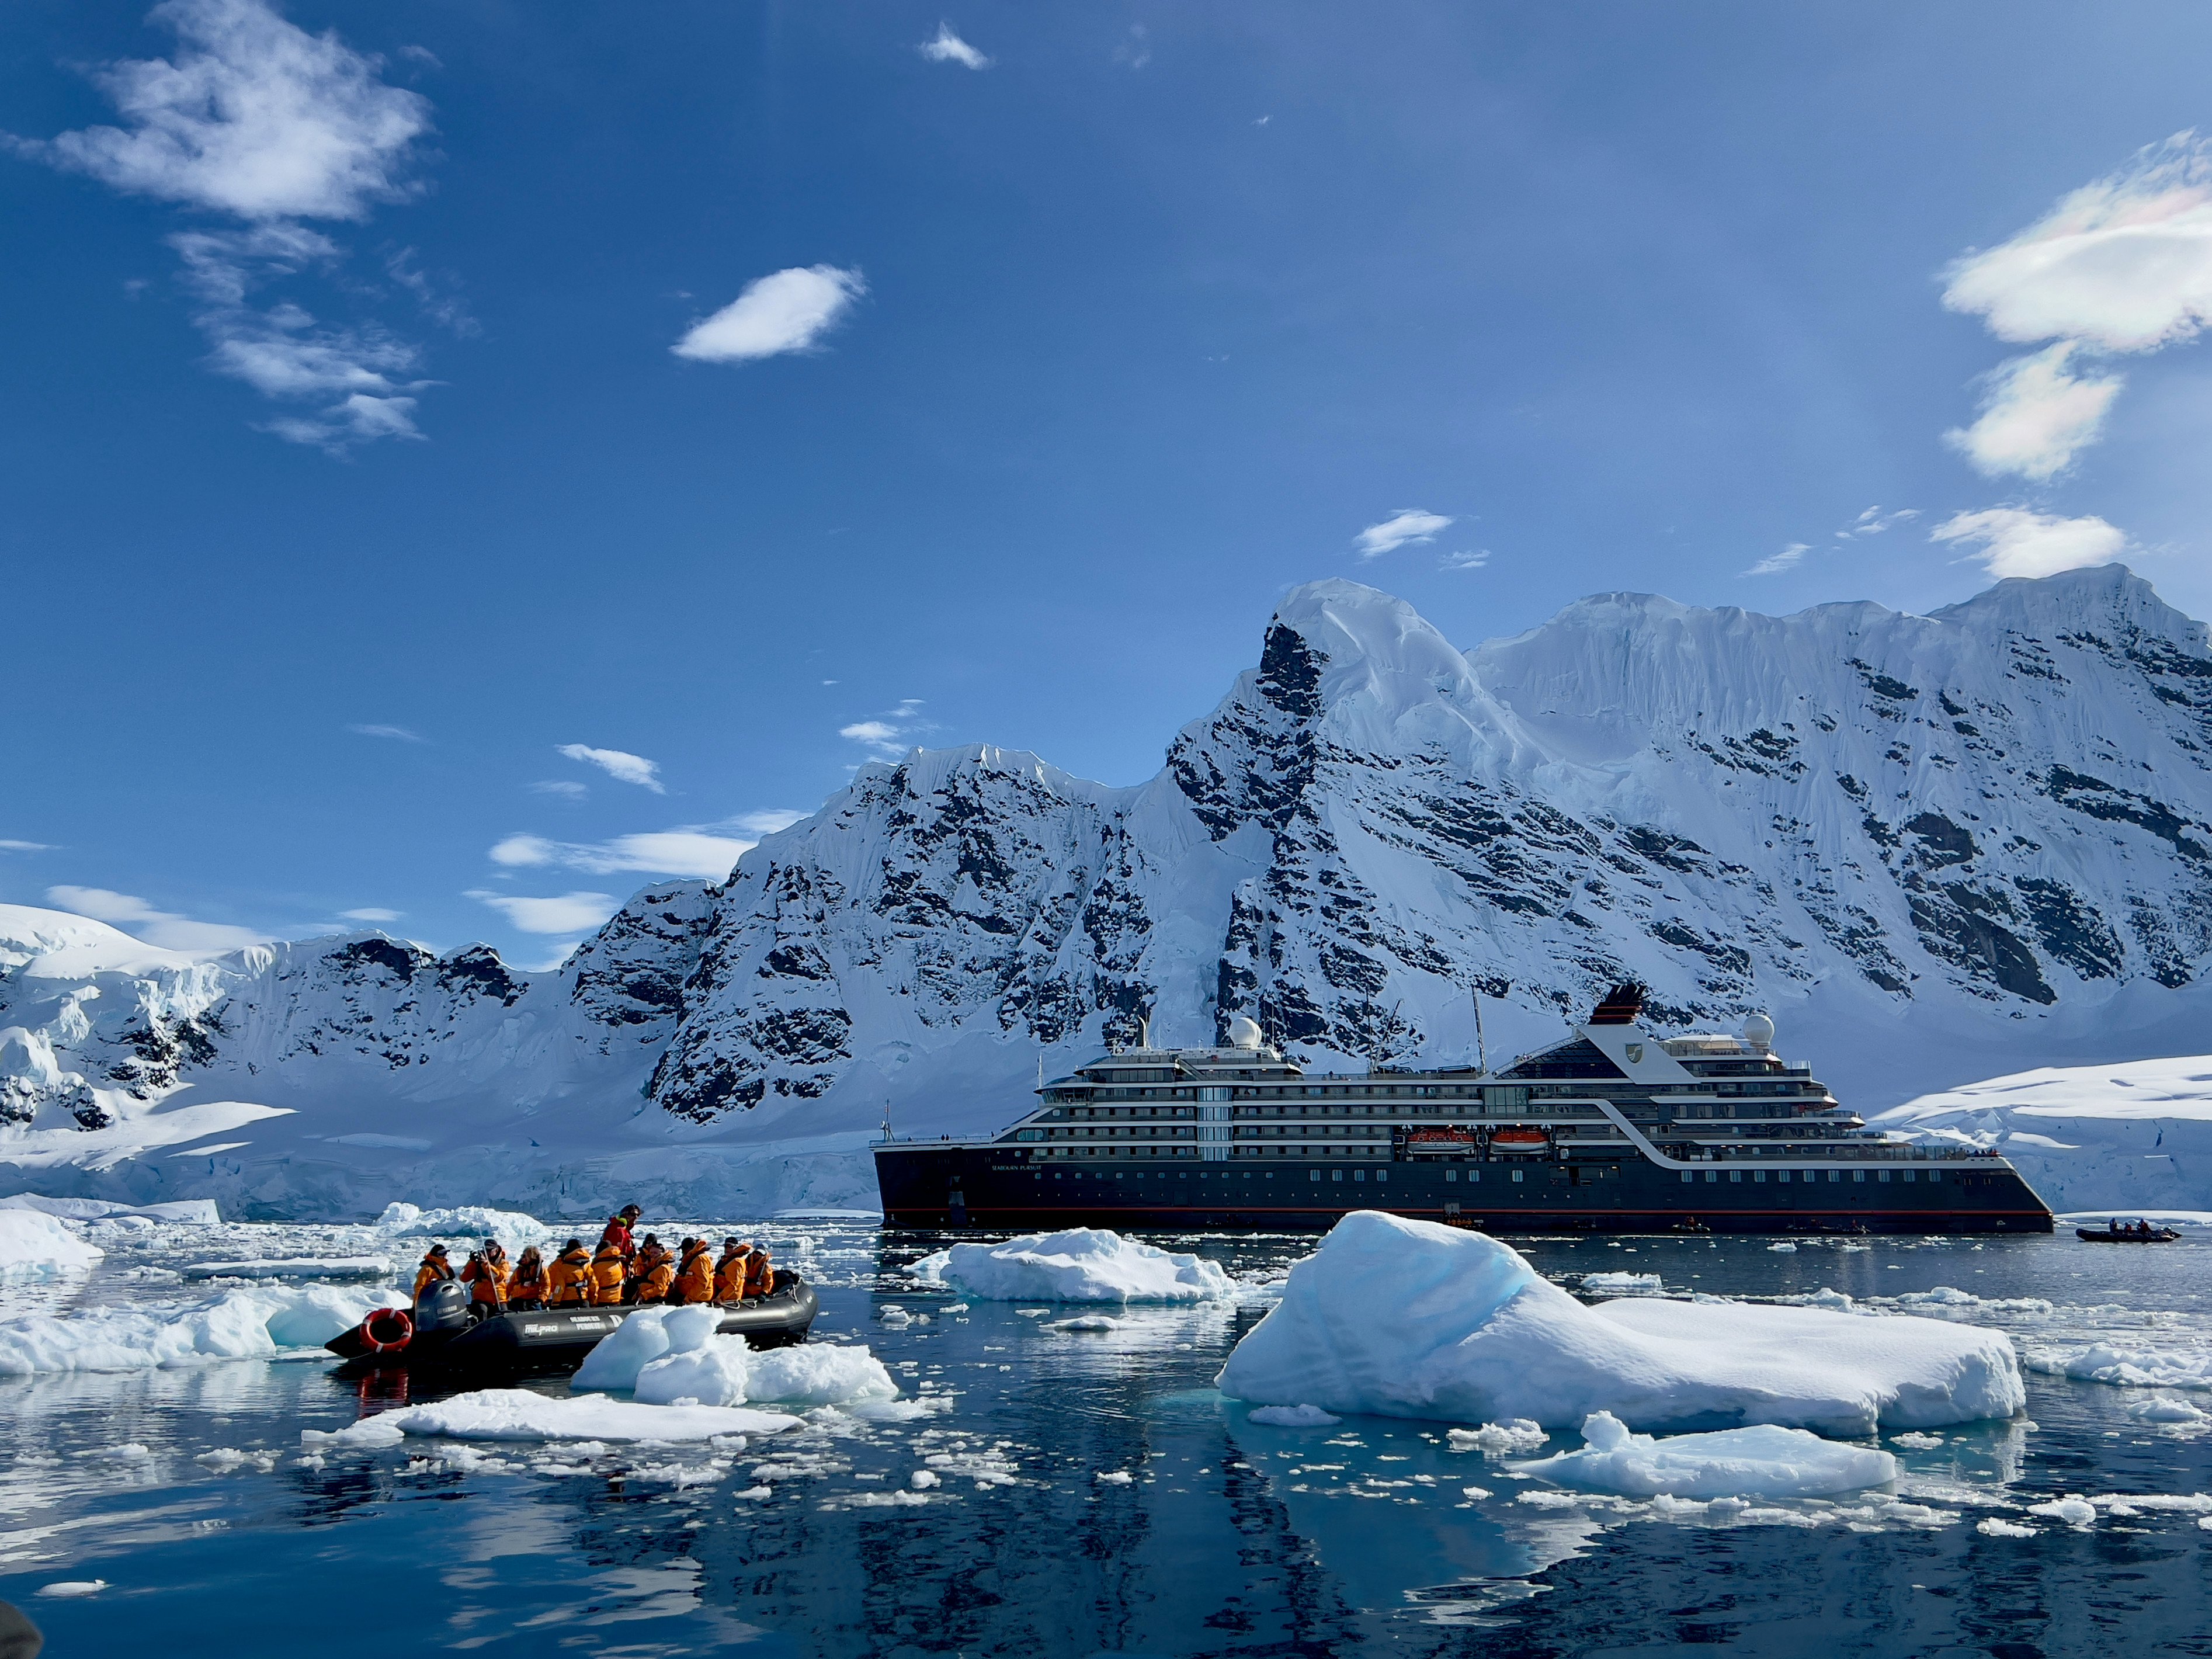 A Zodiac inflatable makes its way back to the Seabourn Pursuit in Antarctica. Photo: Peter Neville-Hadley